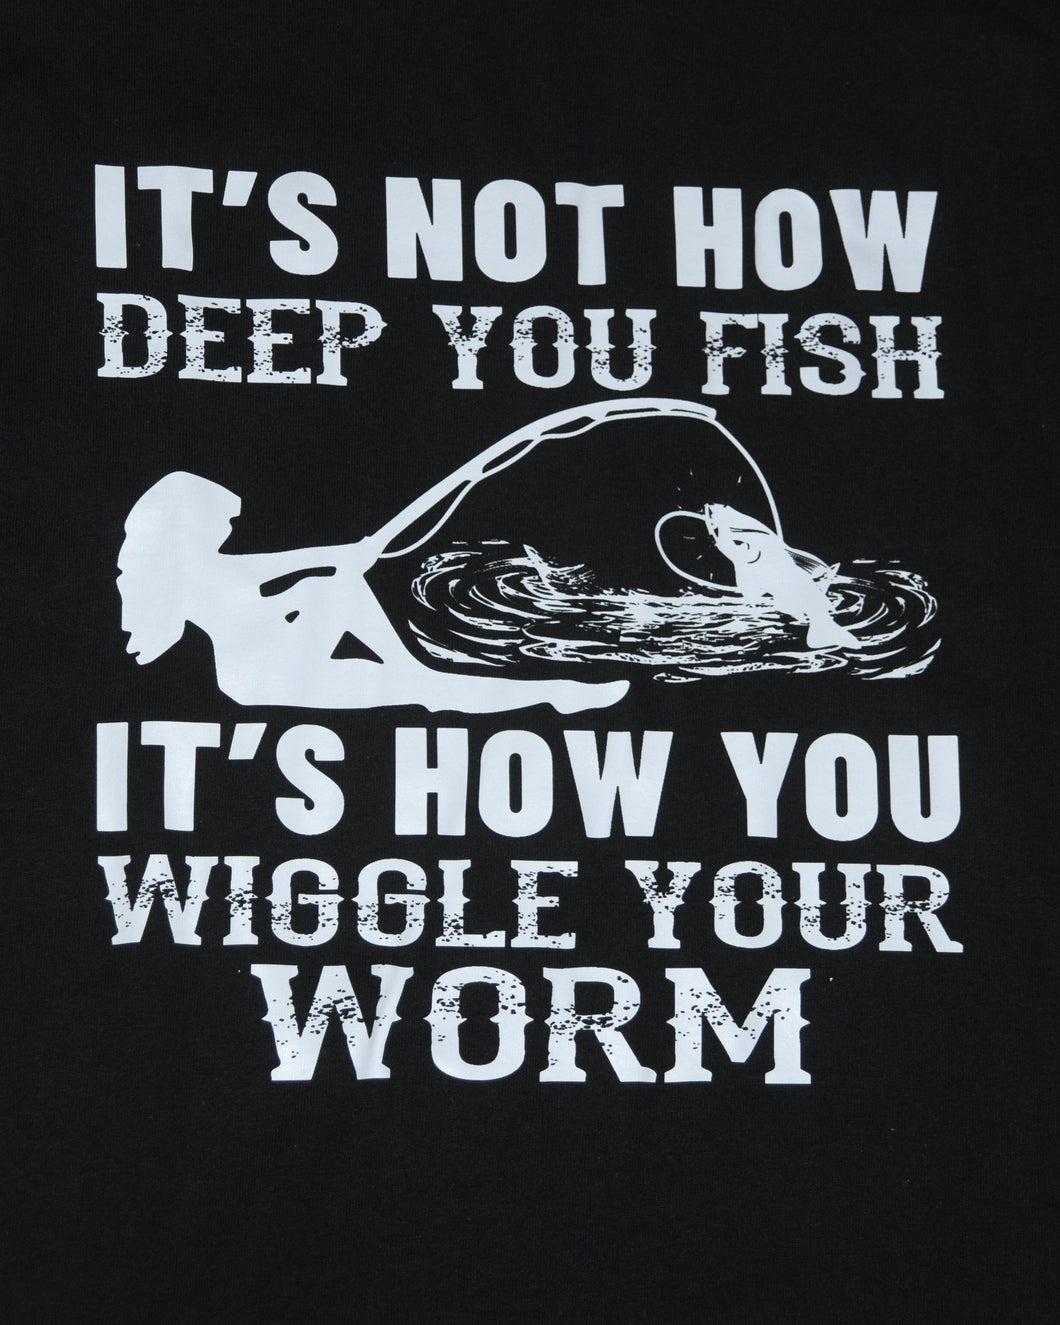 1186 ITS NOT HOW DEEP YOU FISH ITS HOW YOU WIGGLE YOUR WORM